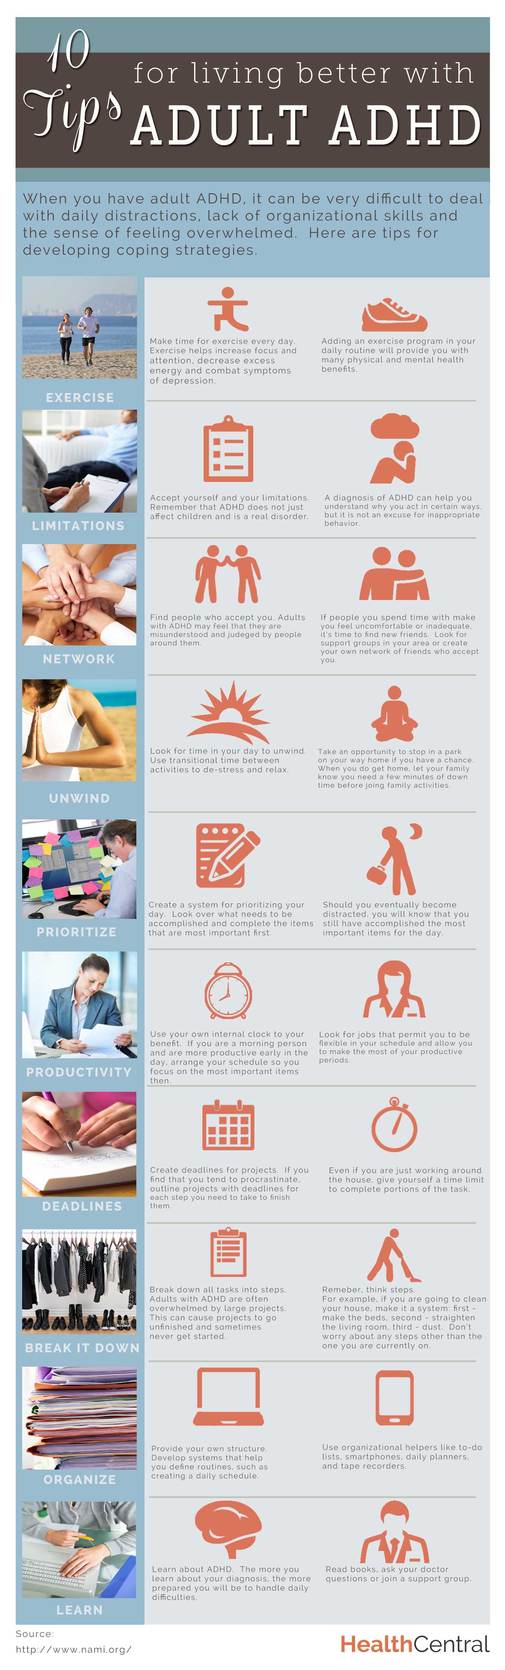 10-tips-for-living-better-with-adult-adhd-infographic